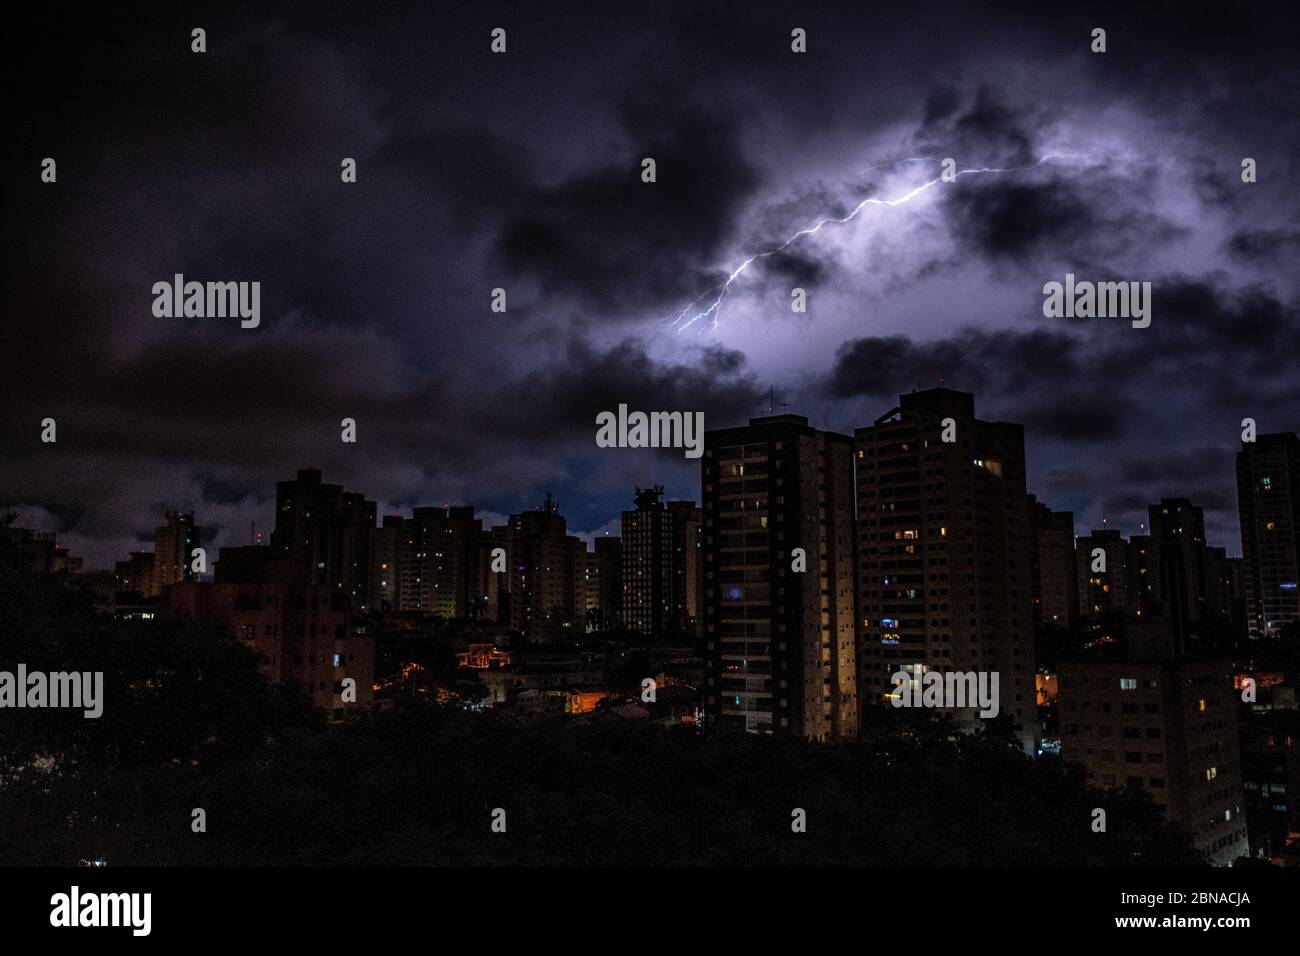 Amazing Shot Of A Cityscape On Dark Clouds And Lightning Background Stock Photo Alamy